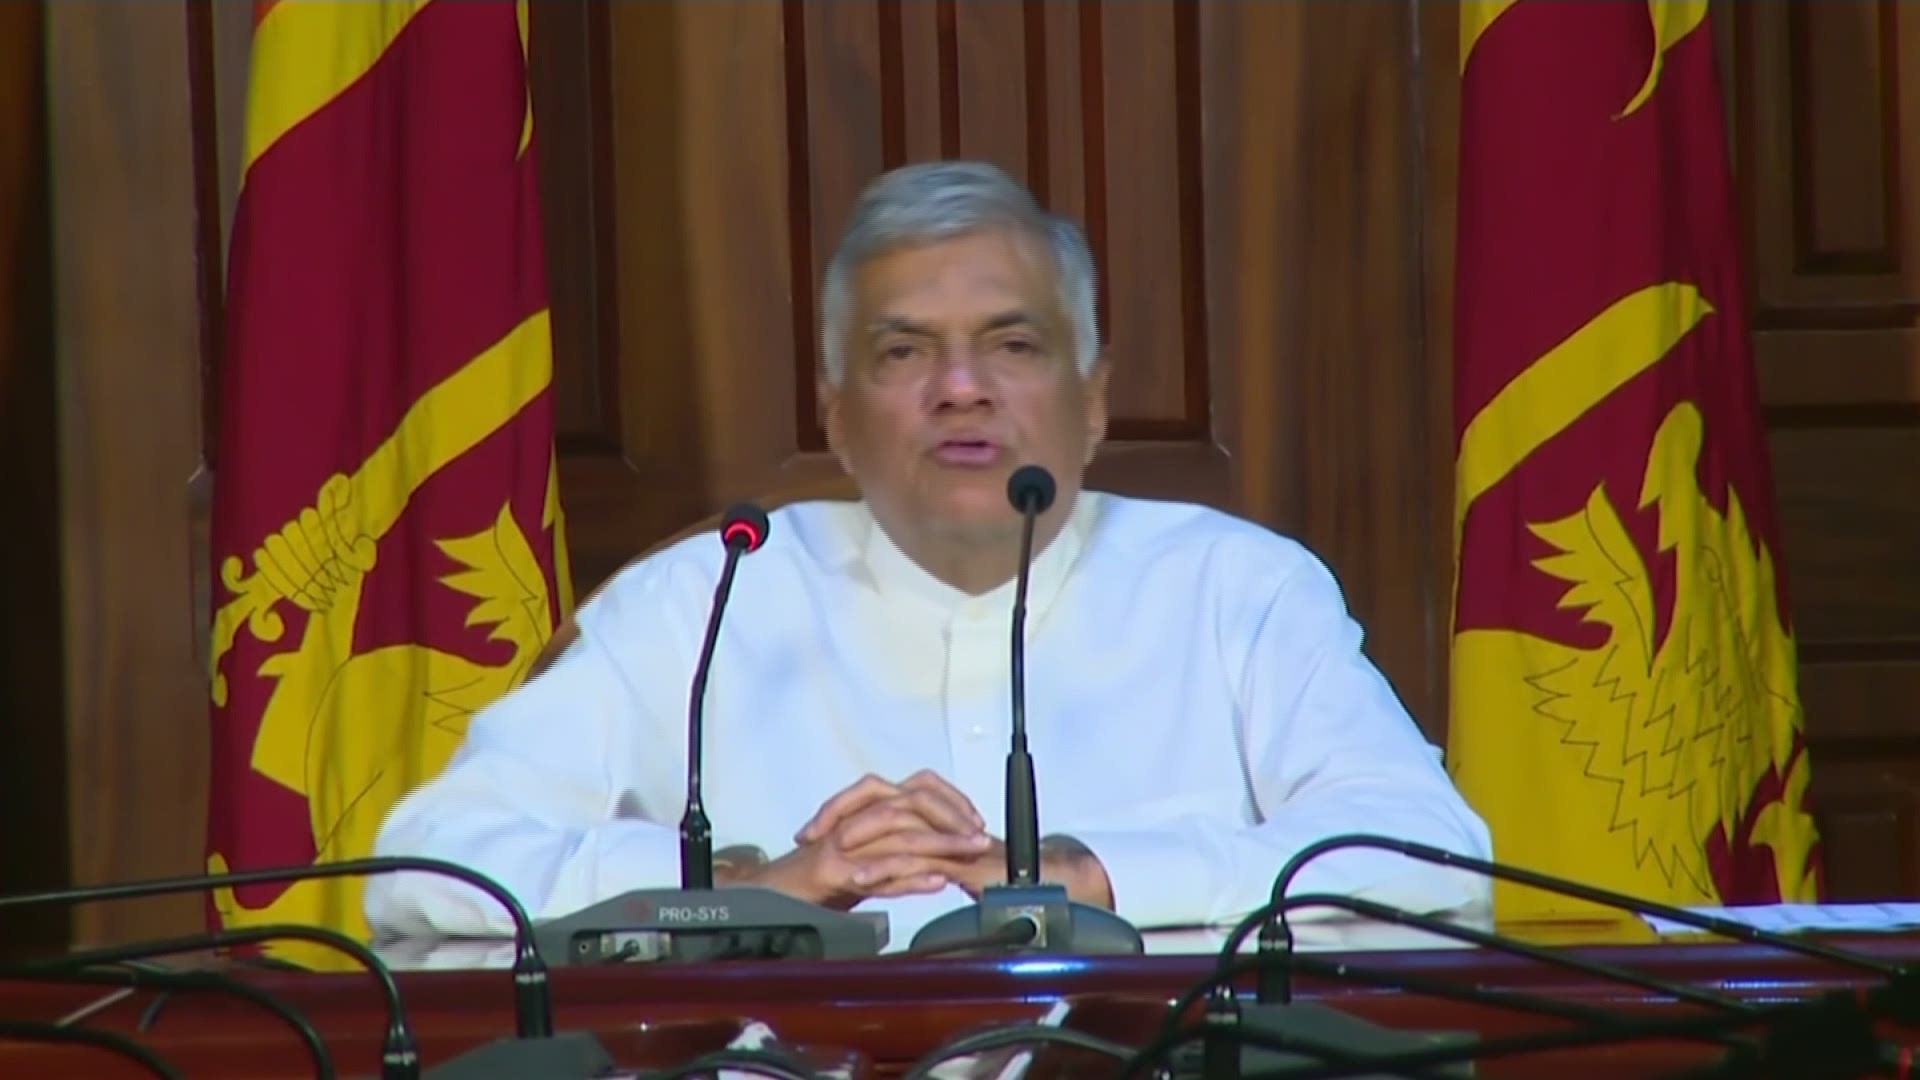 Prime Minister Ranil Wicramasinghe says Sri Lanka will use all possible assistance from within the country 'and outside' to 'wipe out this menace once and for all', after eight deadly bomb blasts left over 200 people dead.